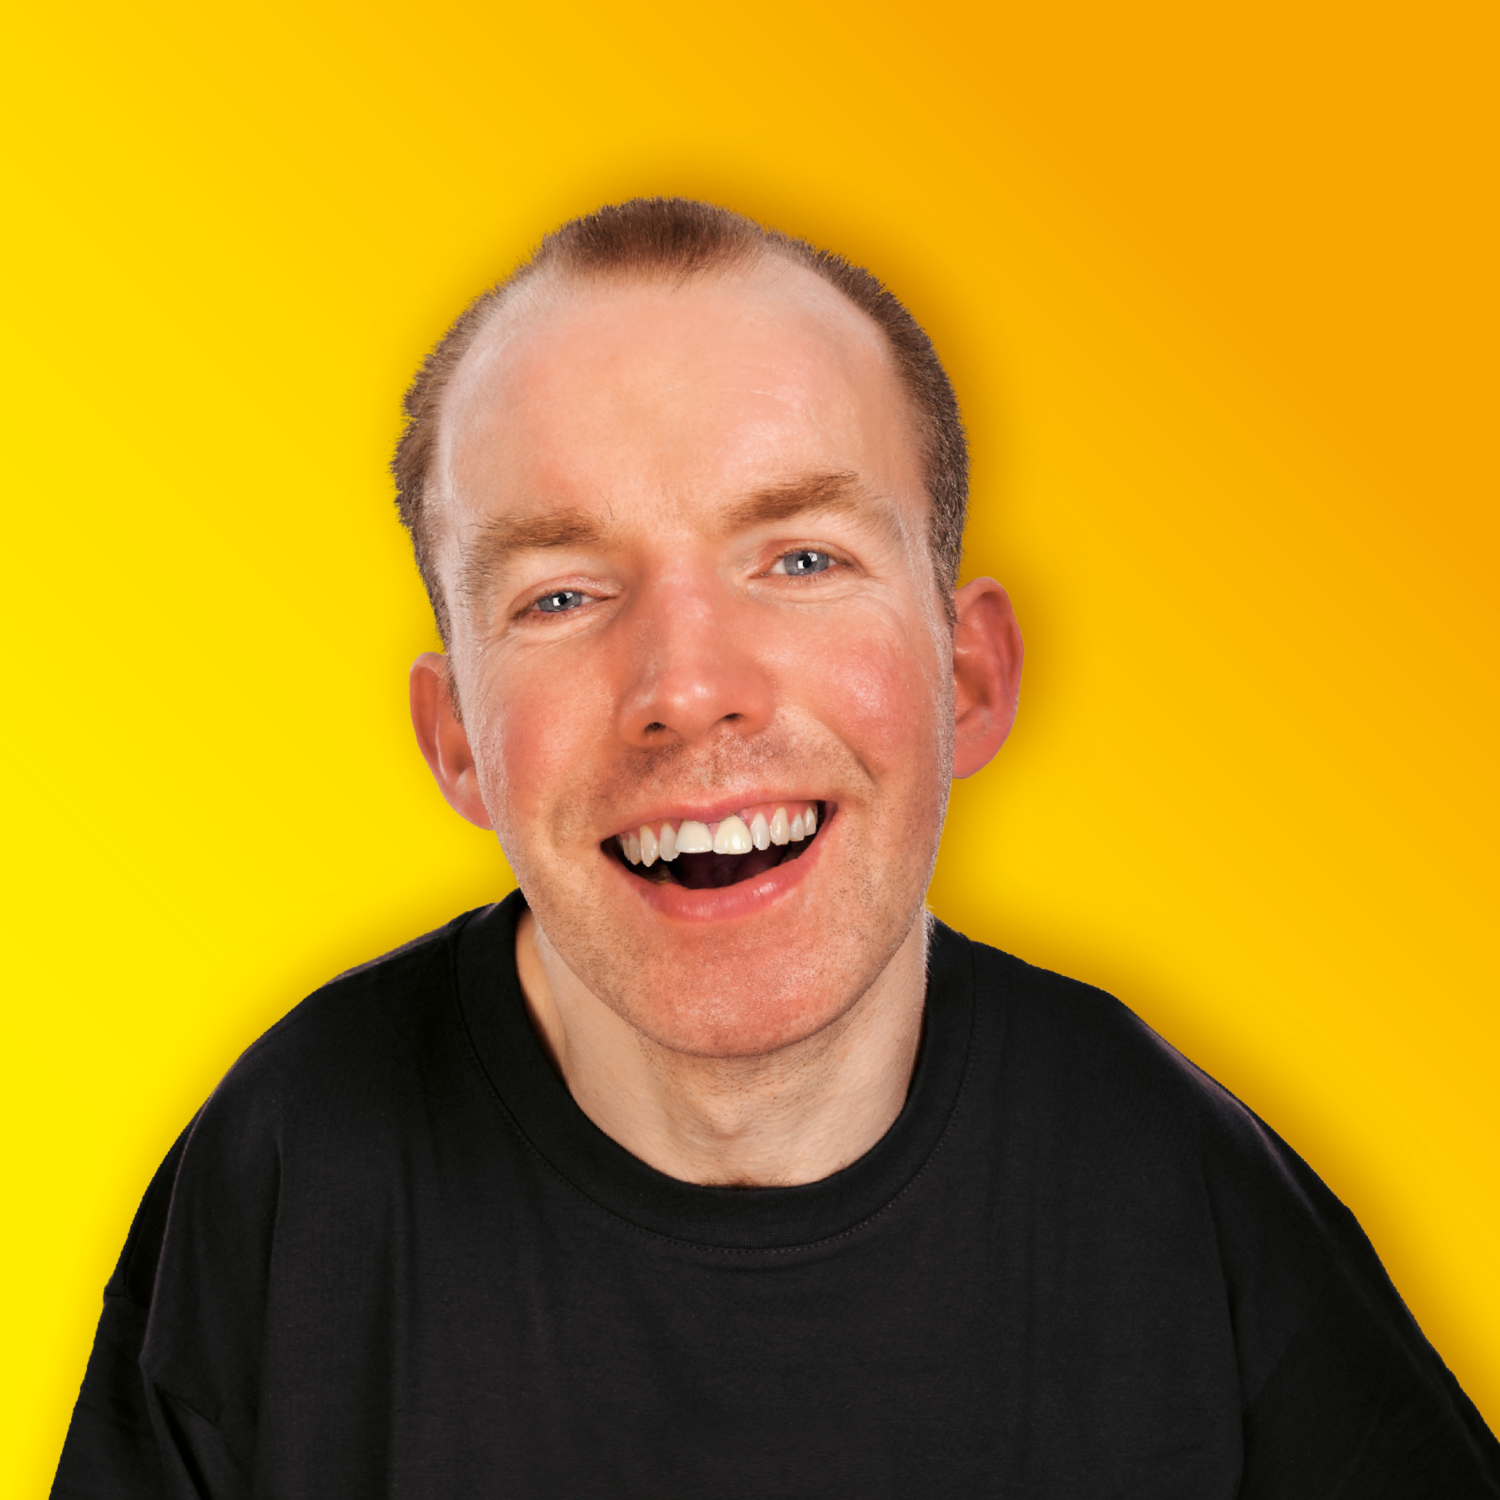 An interview with Lee Ridley AKA Lost Voice Guy Newhampton Arts Centre